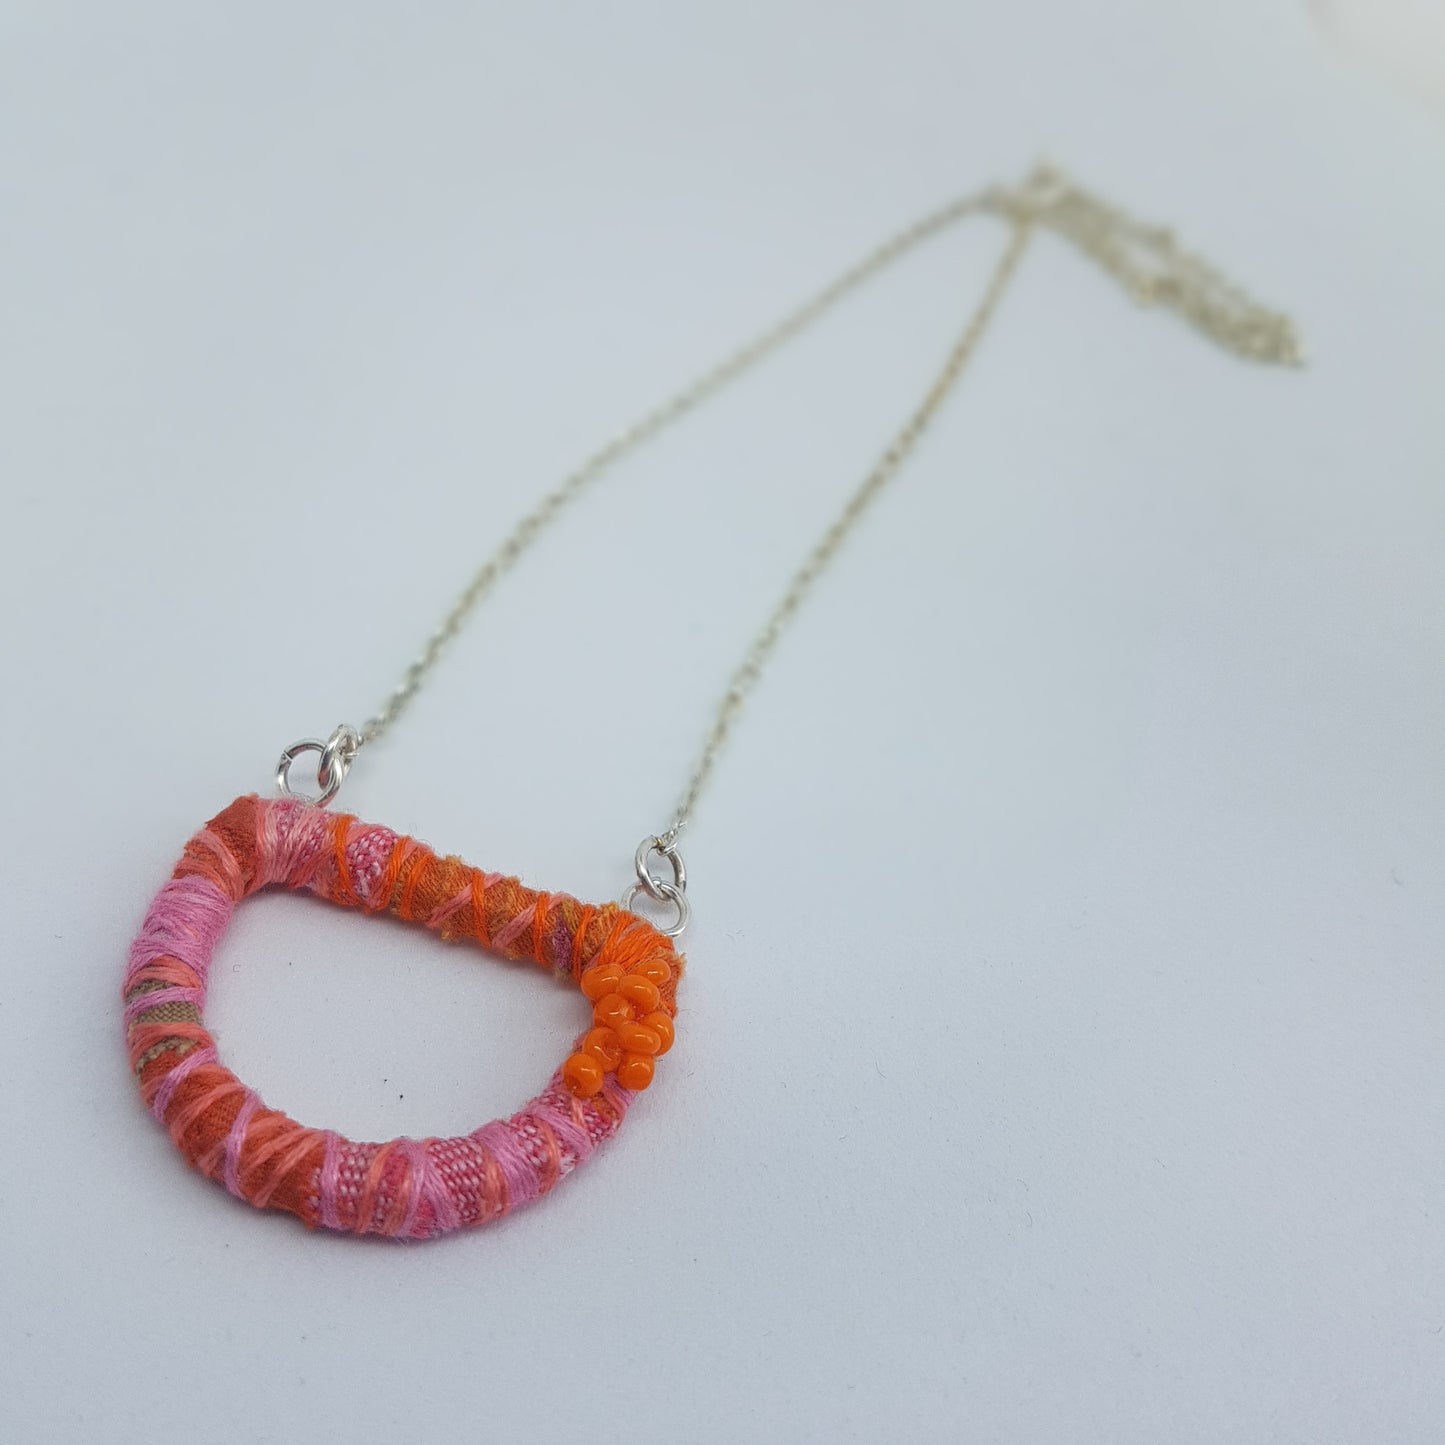 Orange and pink textile art necklace lying on a white table top